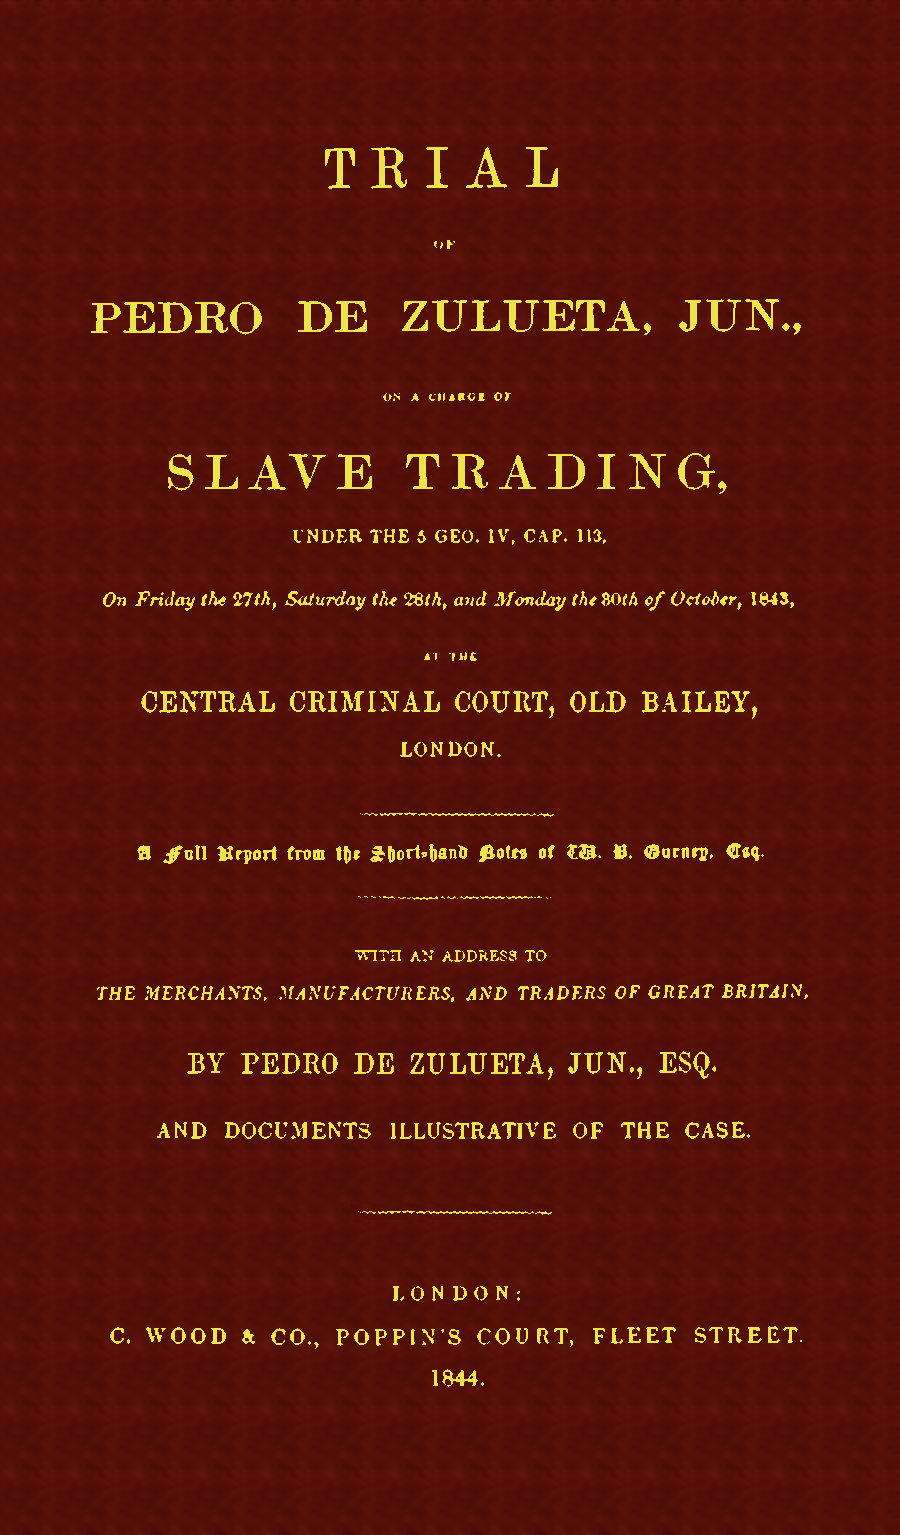 The Project Gutenberg eBook of Trial Of Pedro De Zulueta, Jun. On a Charge  of Slave Trading, under the 5 Geo. IV, Cap. 113, On Friday the 27th,  Saturday the 28th, and